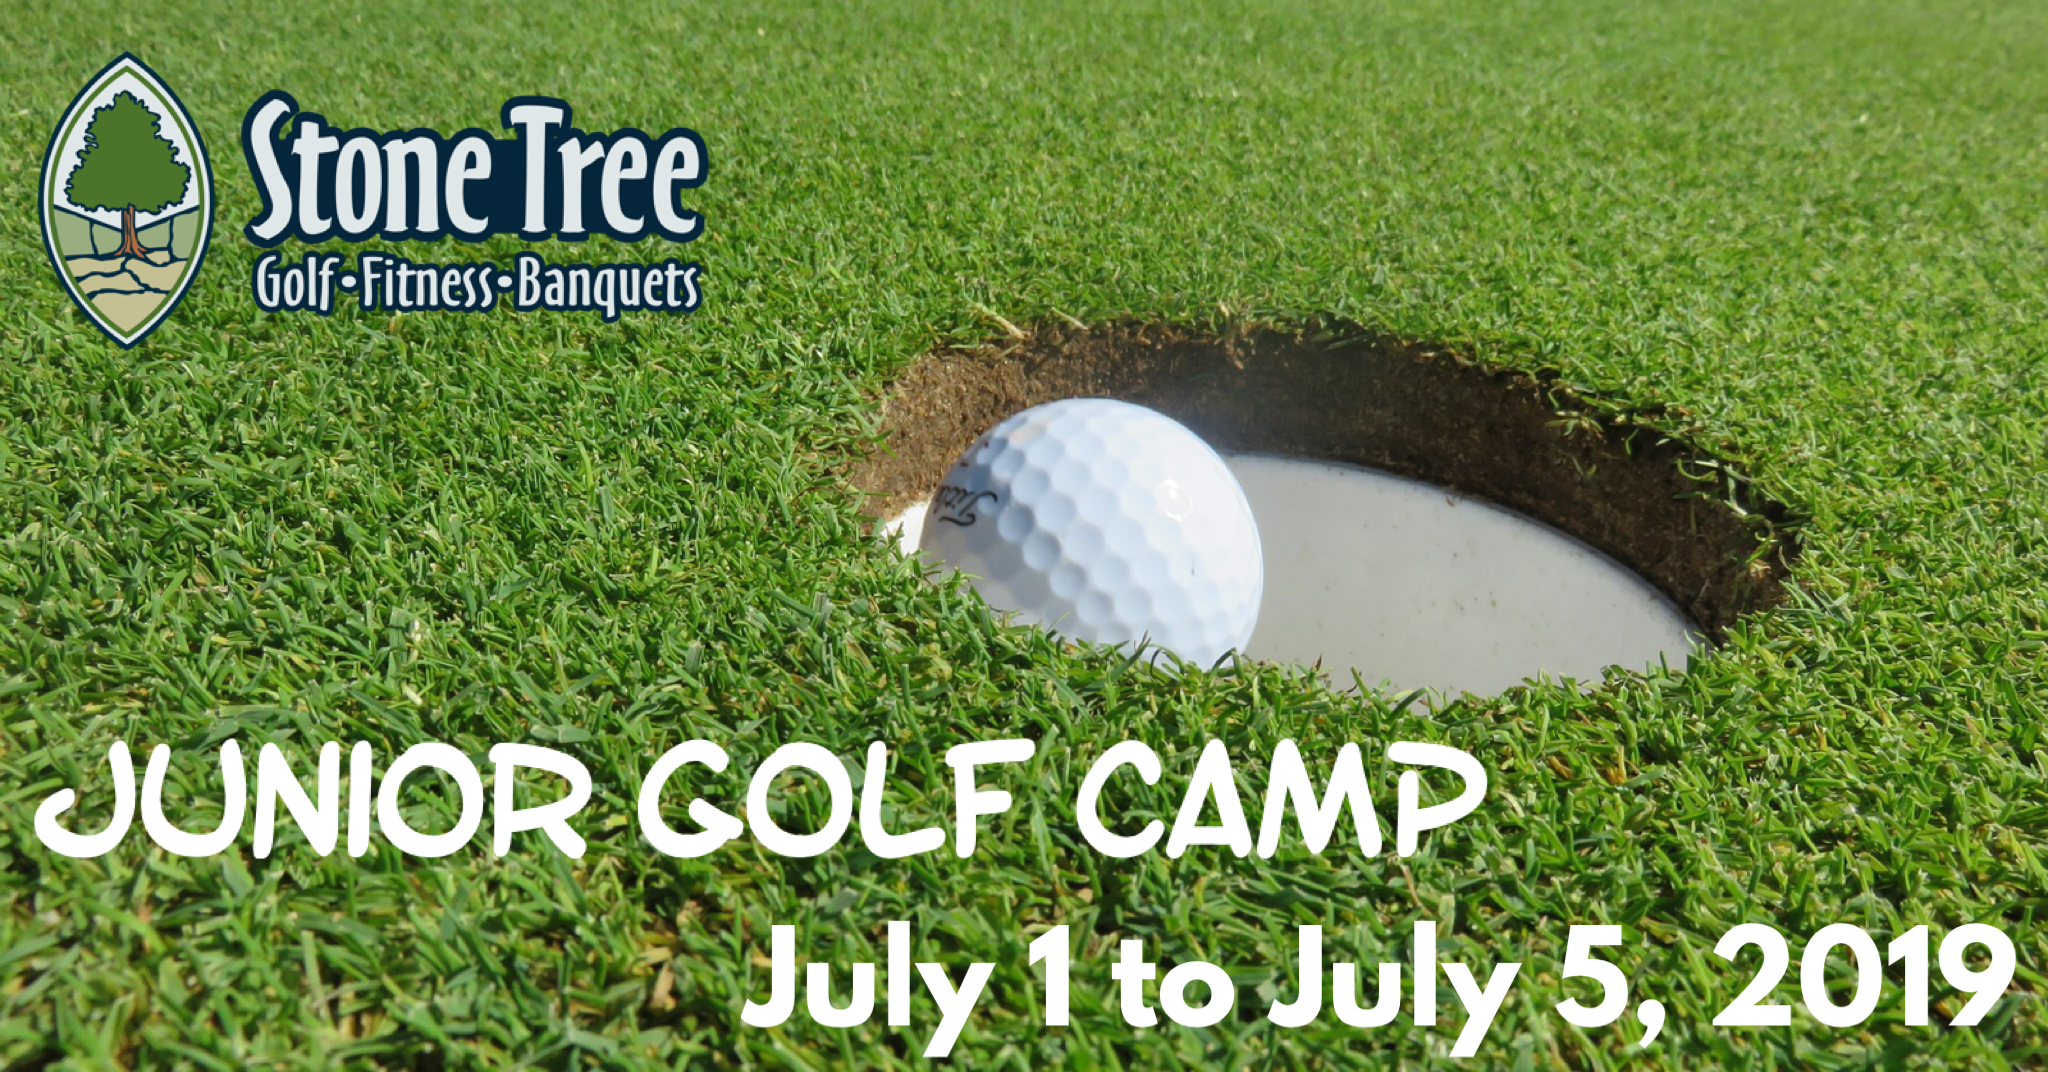 Junior Golf Camp - July 8 to July 12, 2019